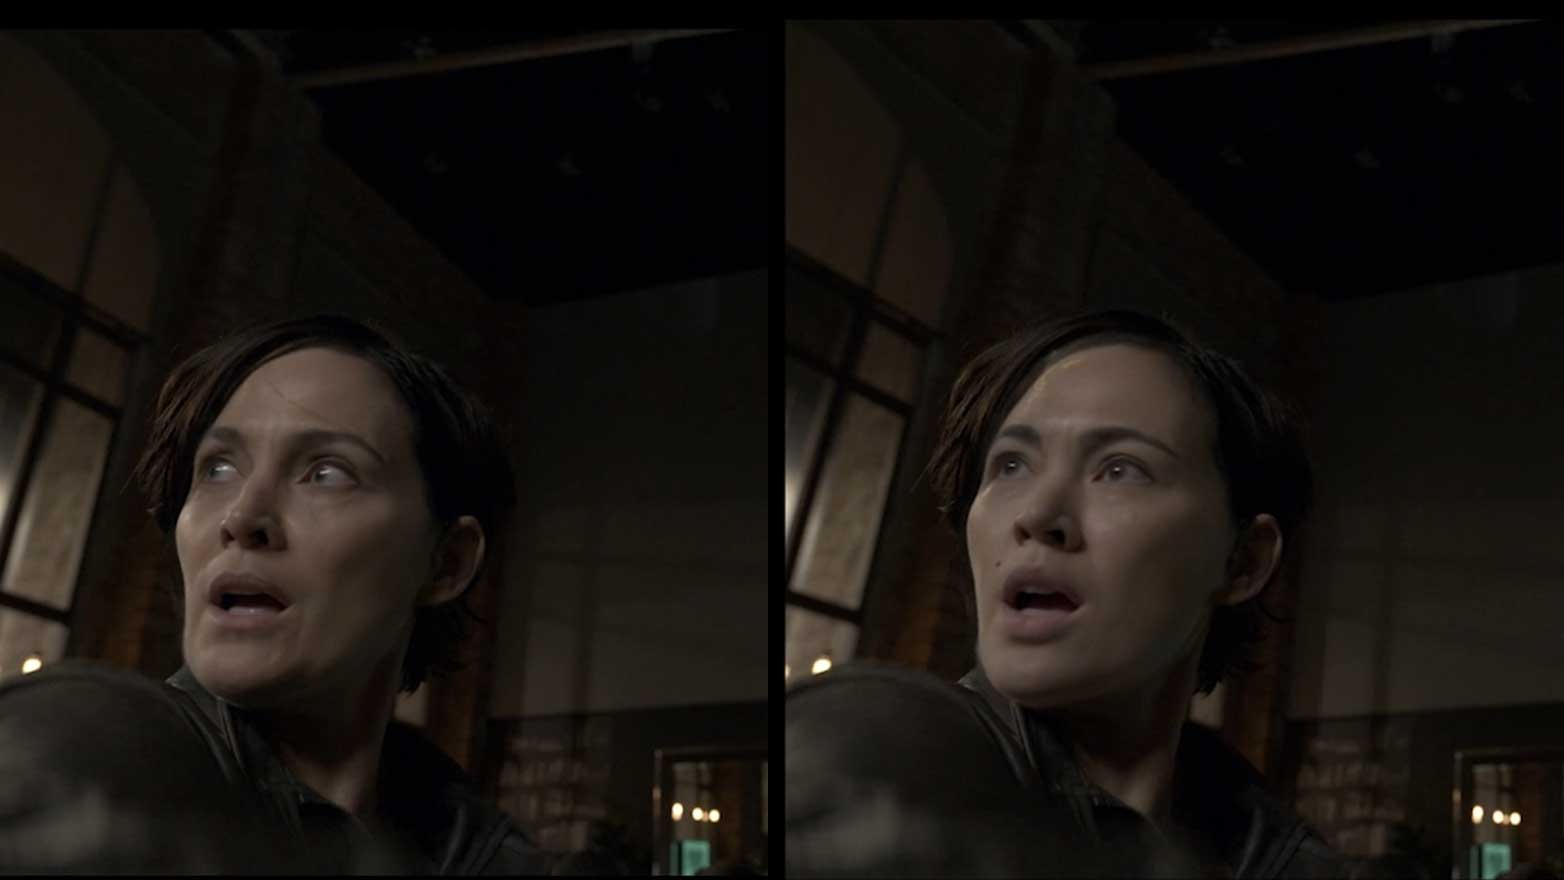 Deepfake of Carrie-Anne Moss to Jessica Henwick for The Matrix Resurrections created by Volucap